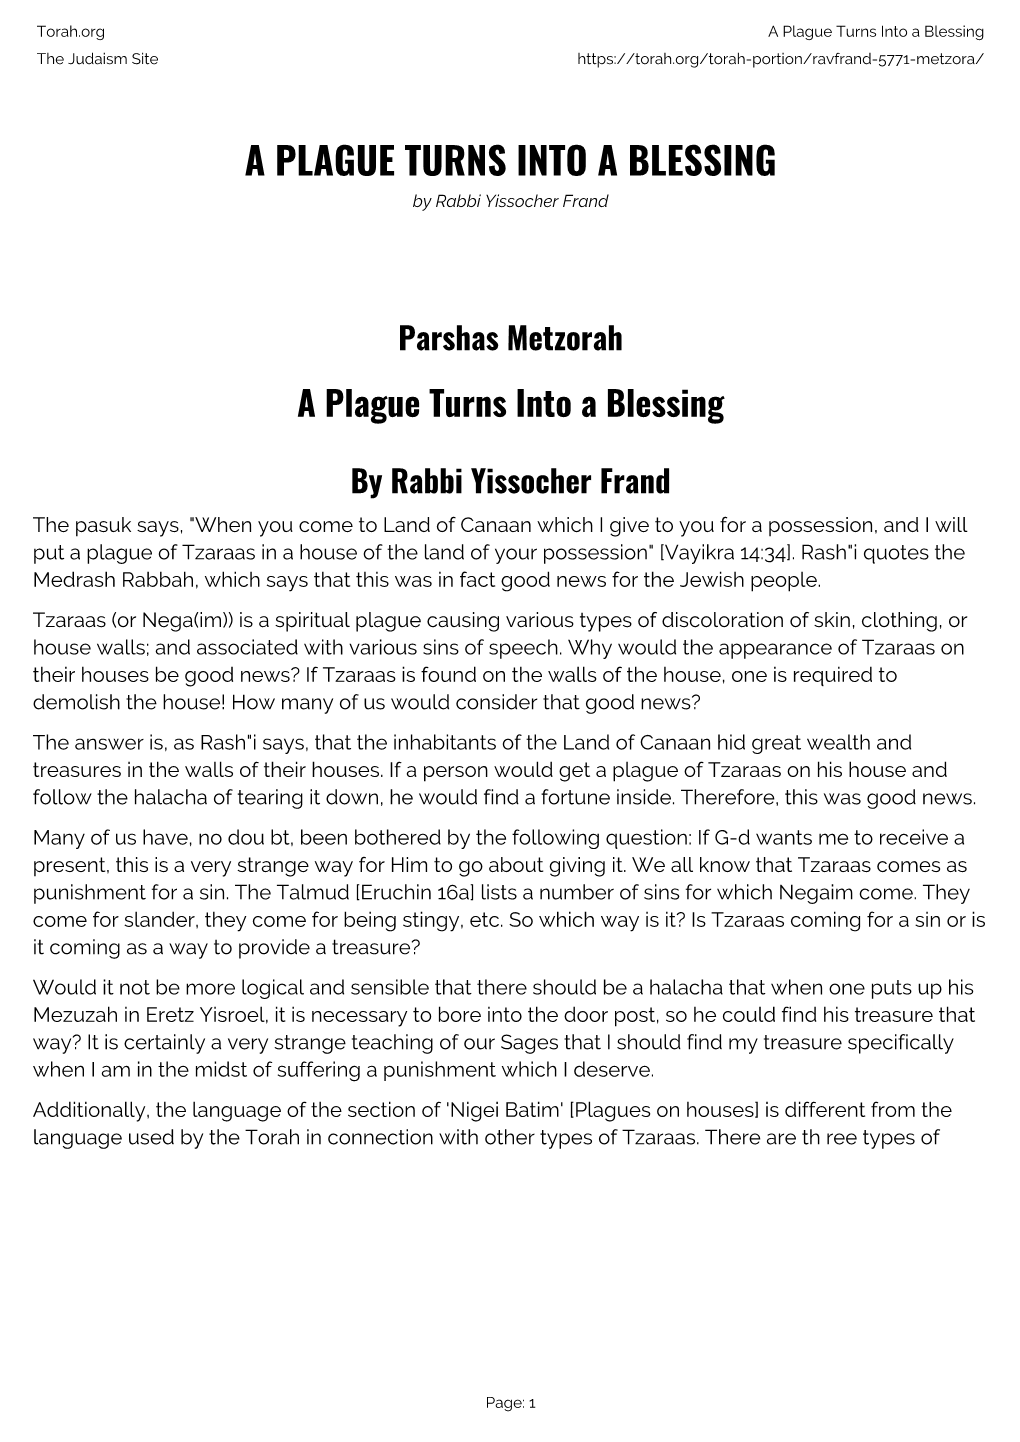 A Plague Turns Into a Blessing the Judaism Site